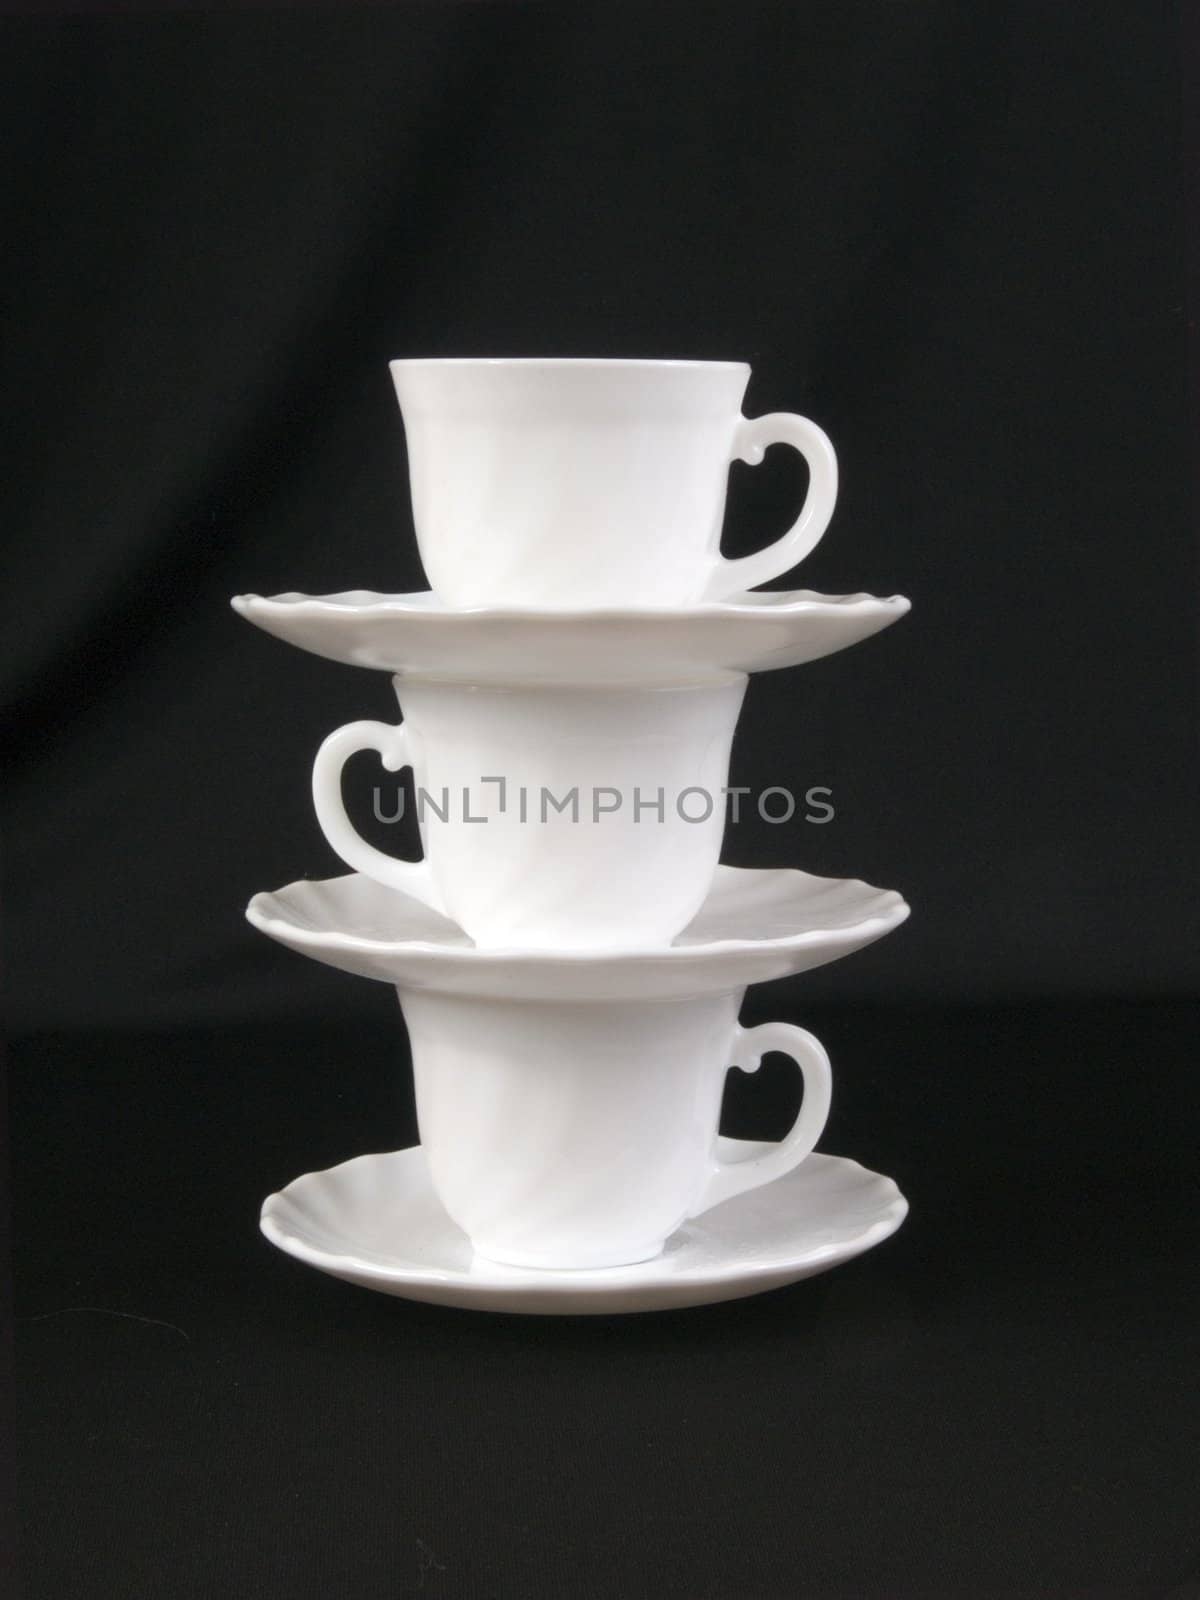 A stack of cups and saucers on the black background